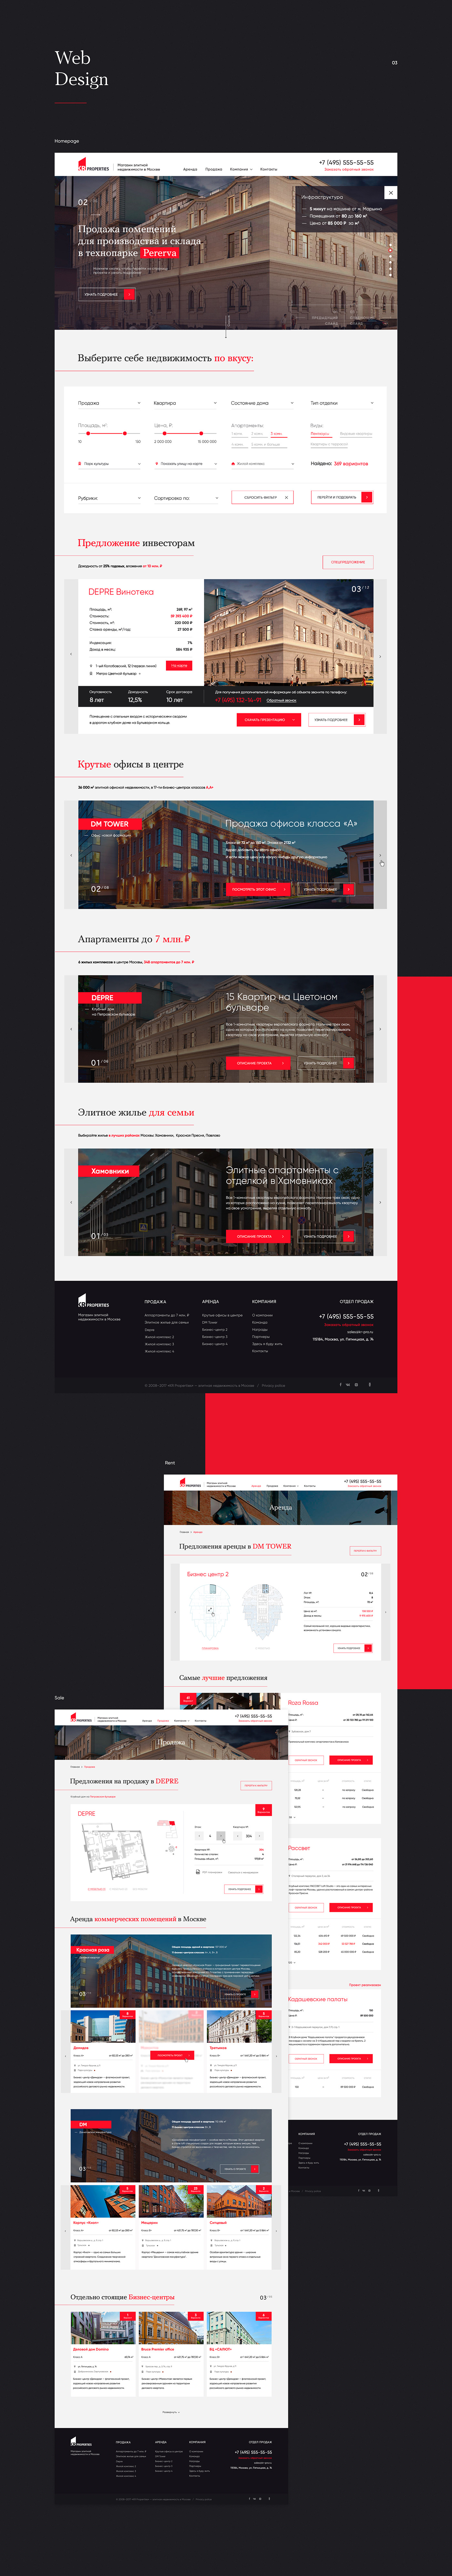 architecture Webdesign interaction real estate clean ux/ui Style